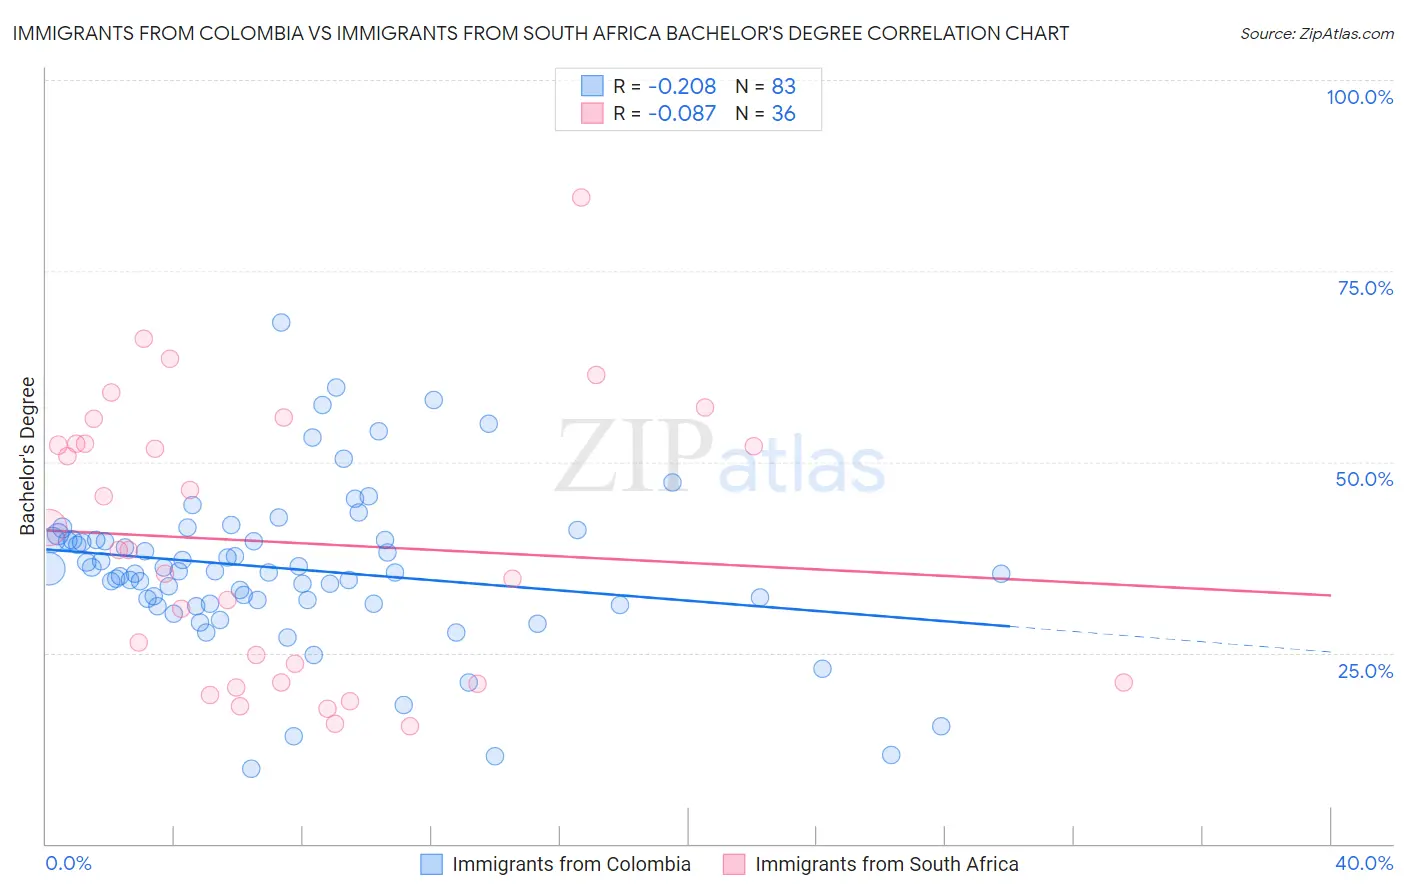 Immigrants from Colombia vs Immigrants from South Africa Bachelor's Degree